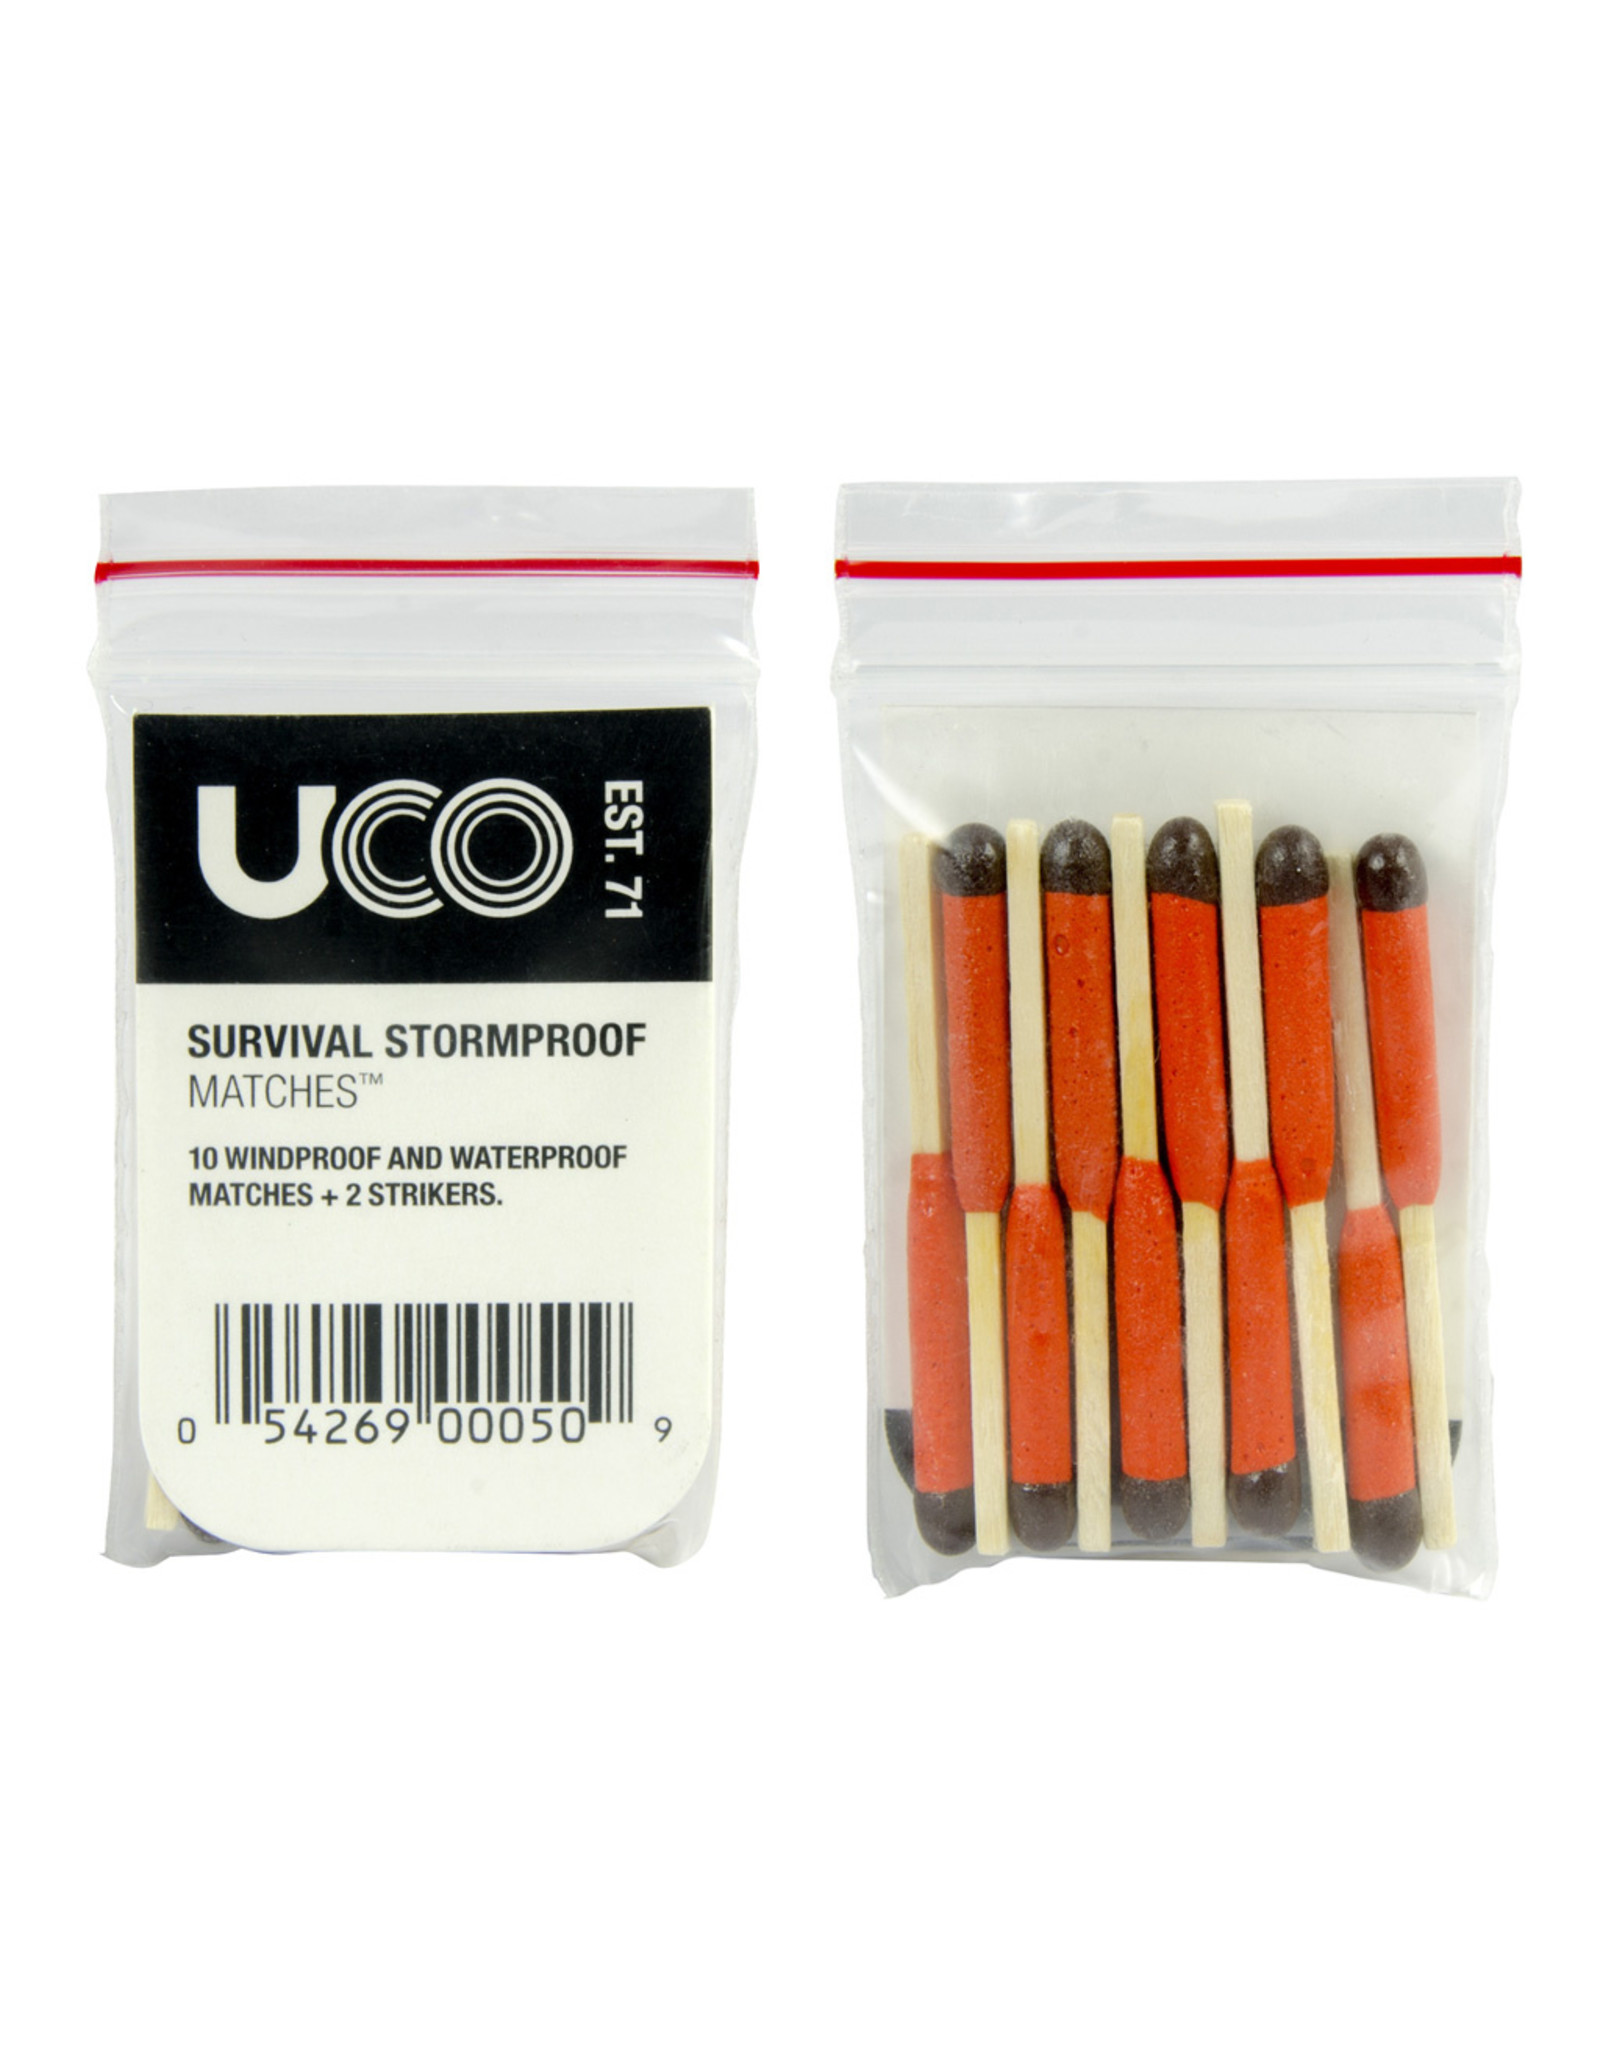 UCO SURVIVAL STORMPROOF MATCHES